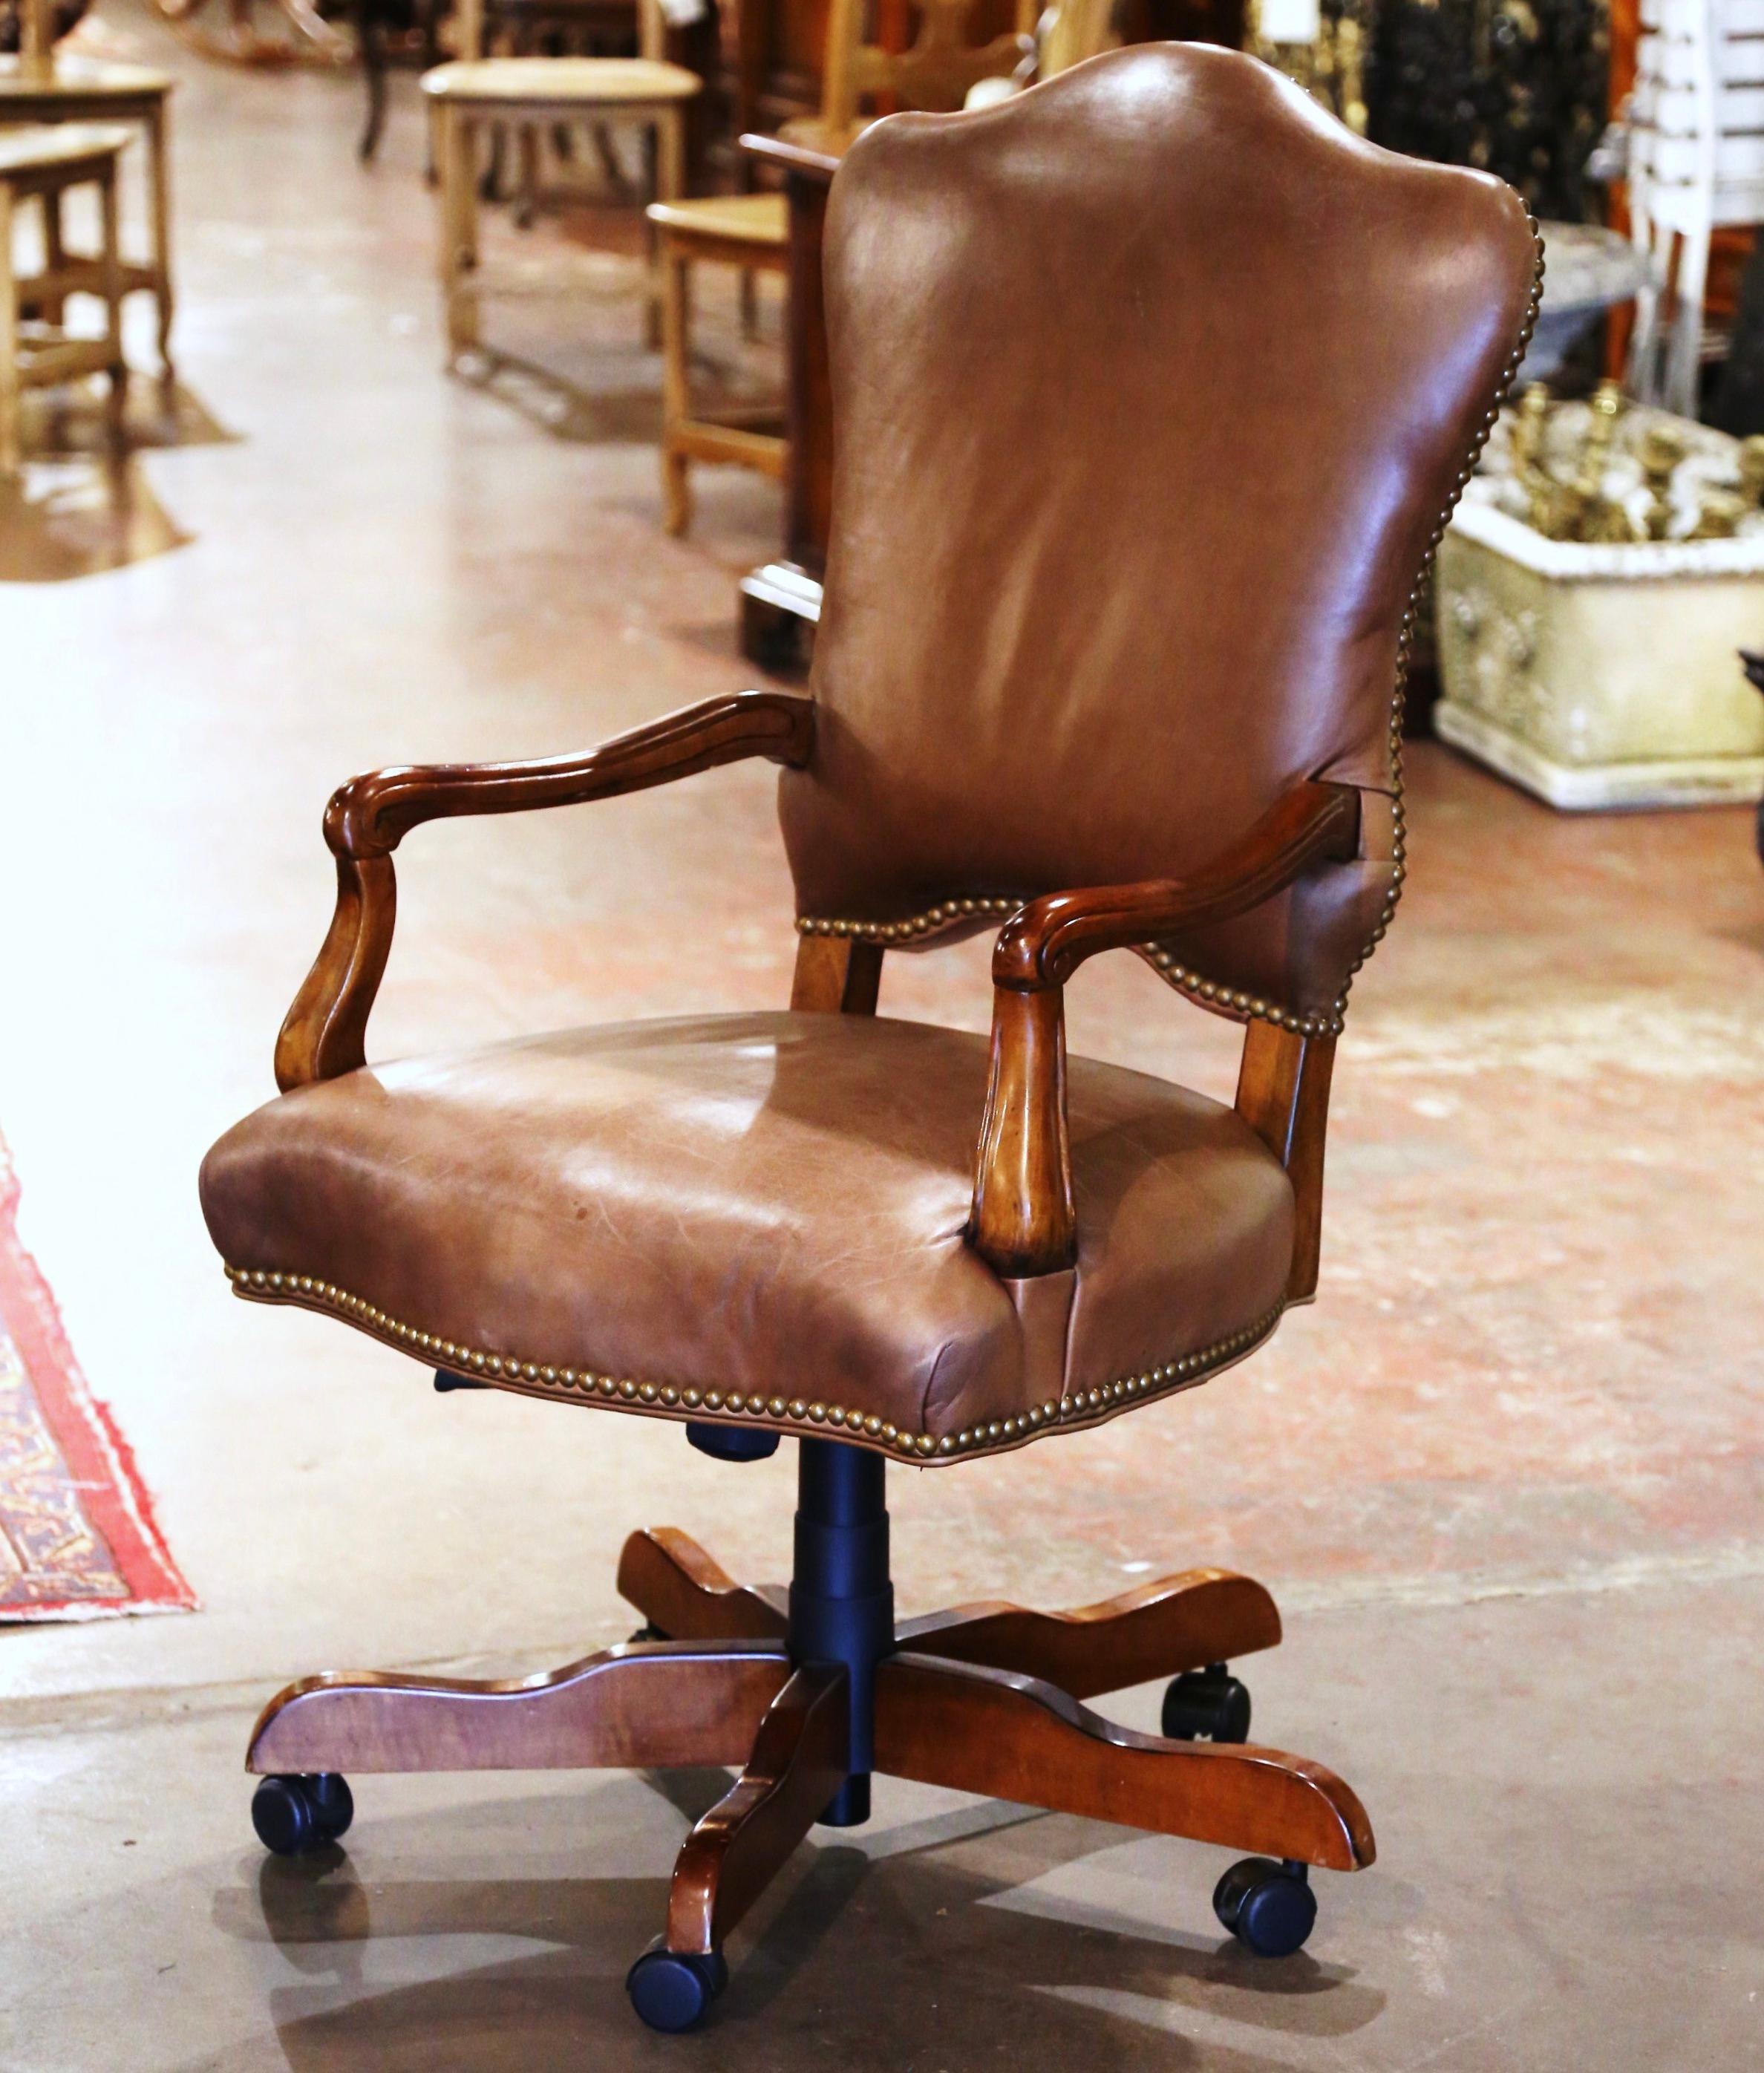 American Vintage Adjustable and Swivel Office Desk Armchair with Tan Leather